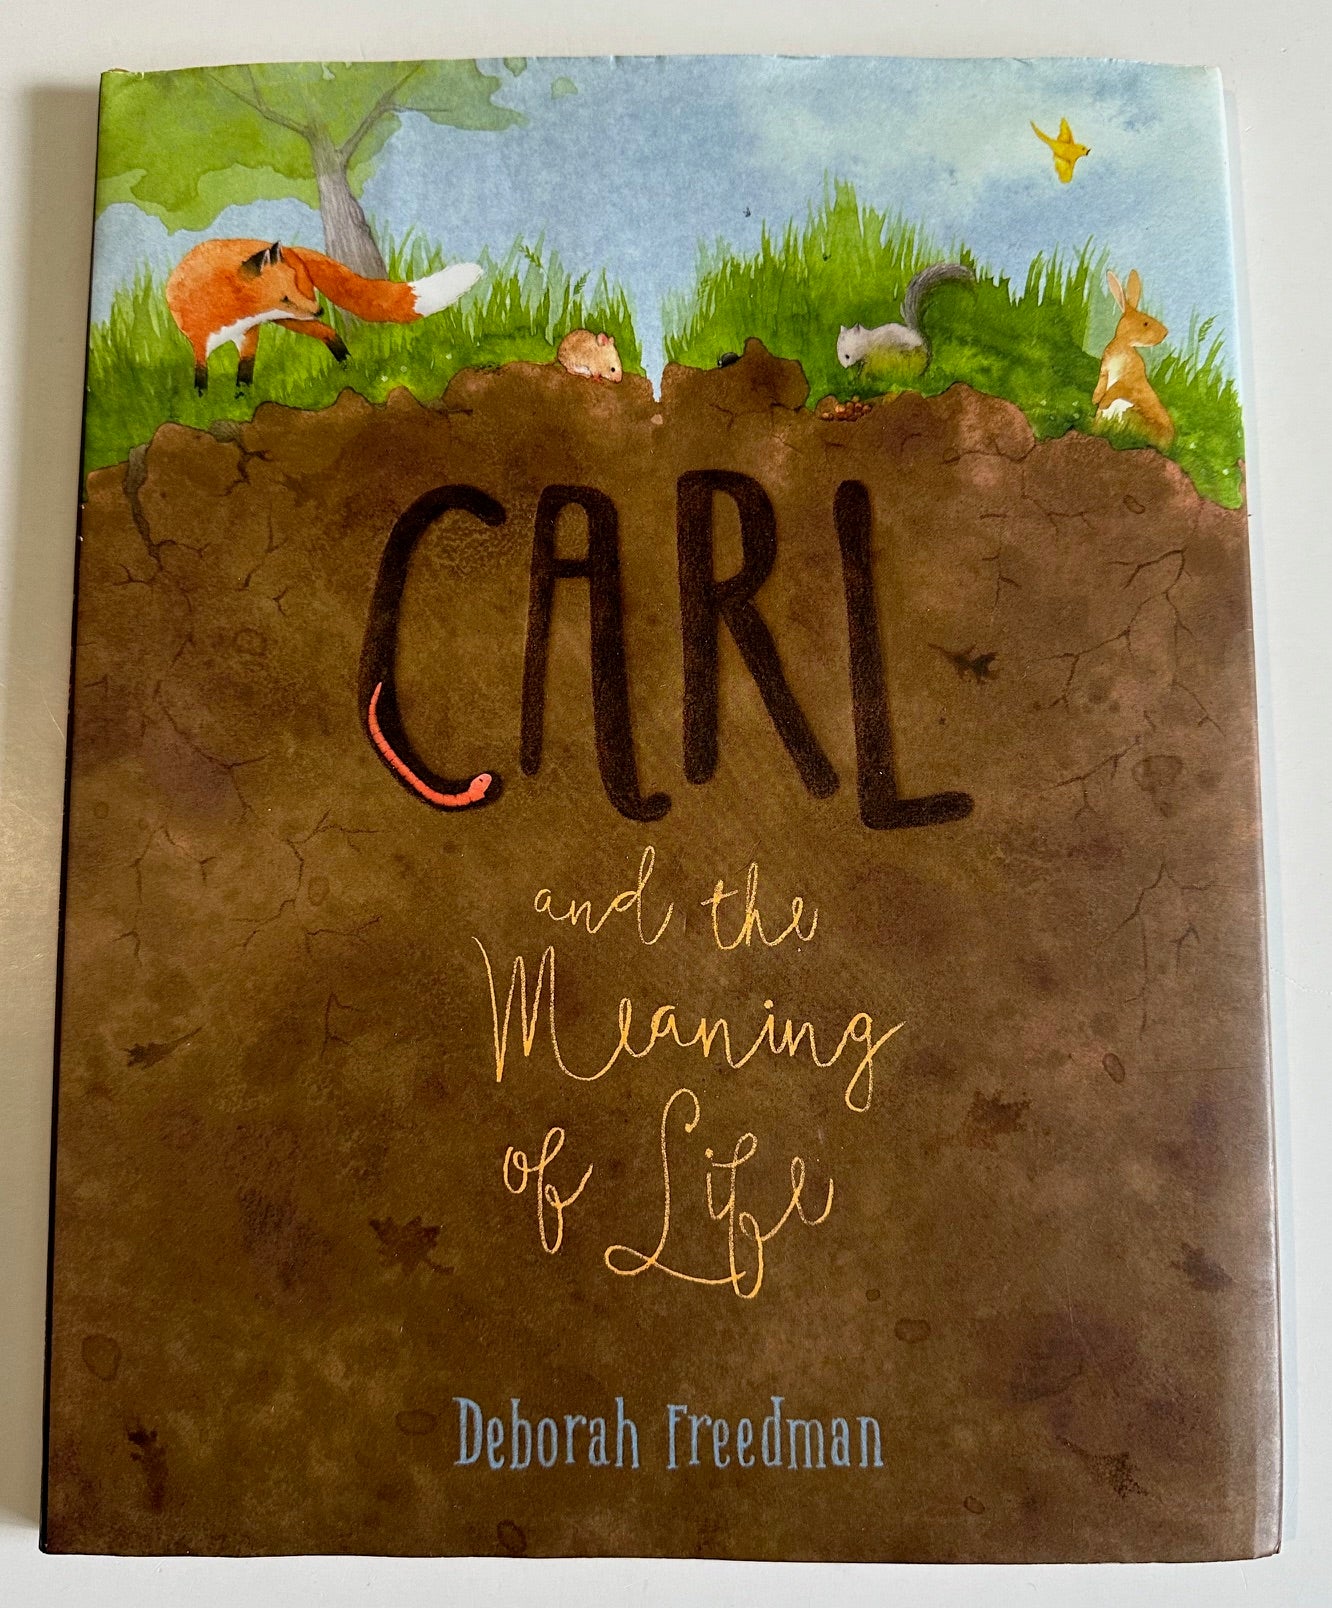 "Carl and the Meaning of Life"